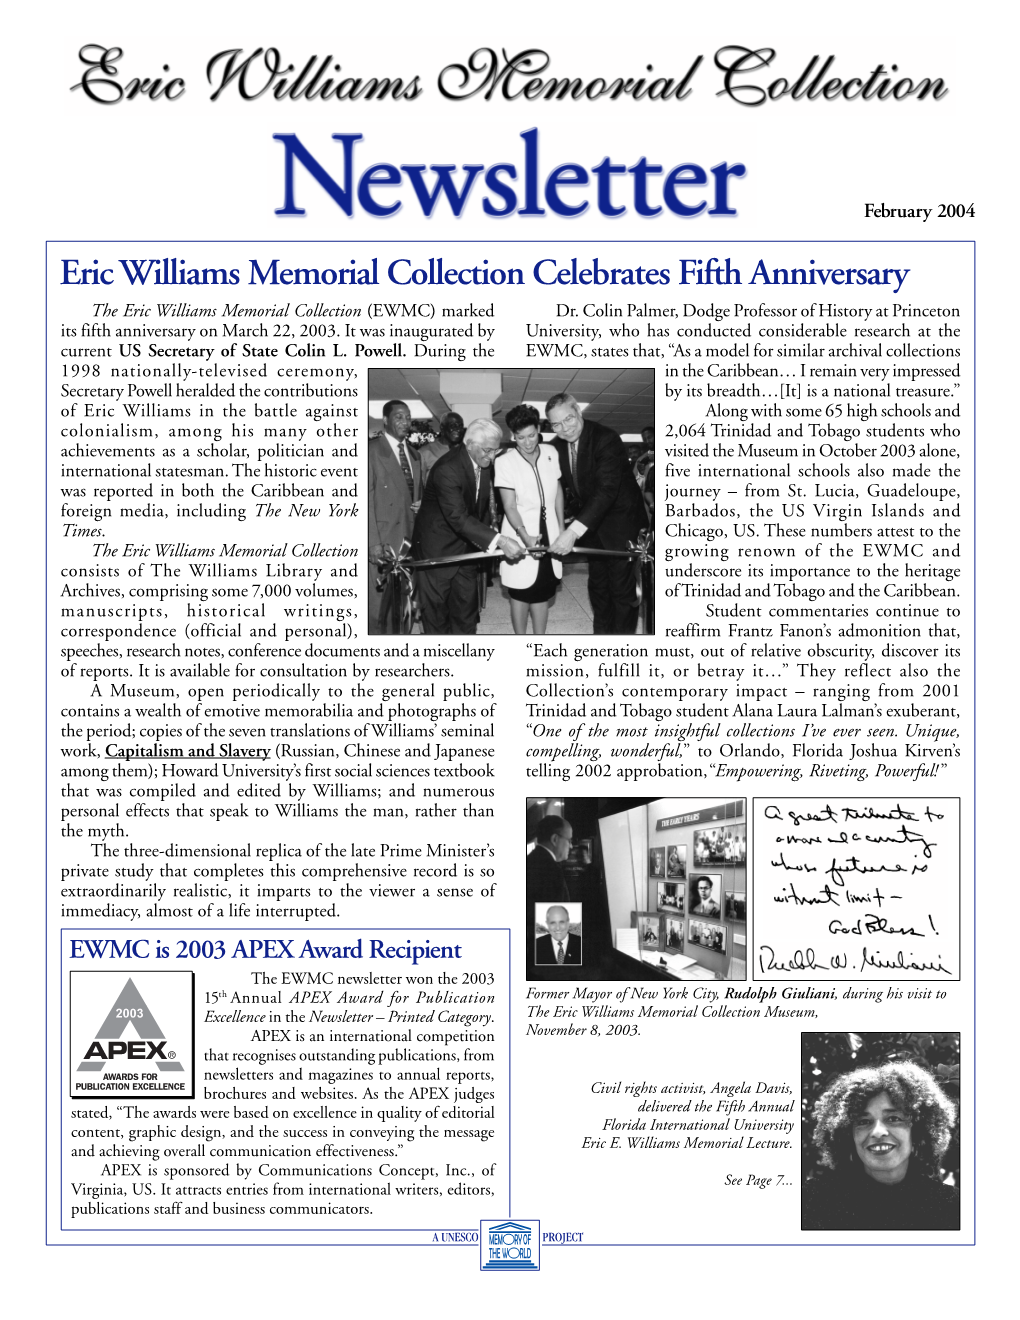 Eric Williams Memorial Collection Newsletter February 2004